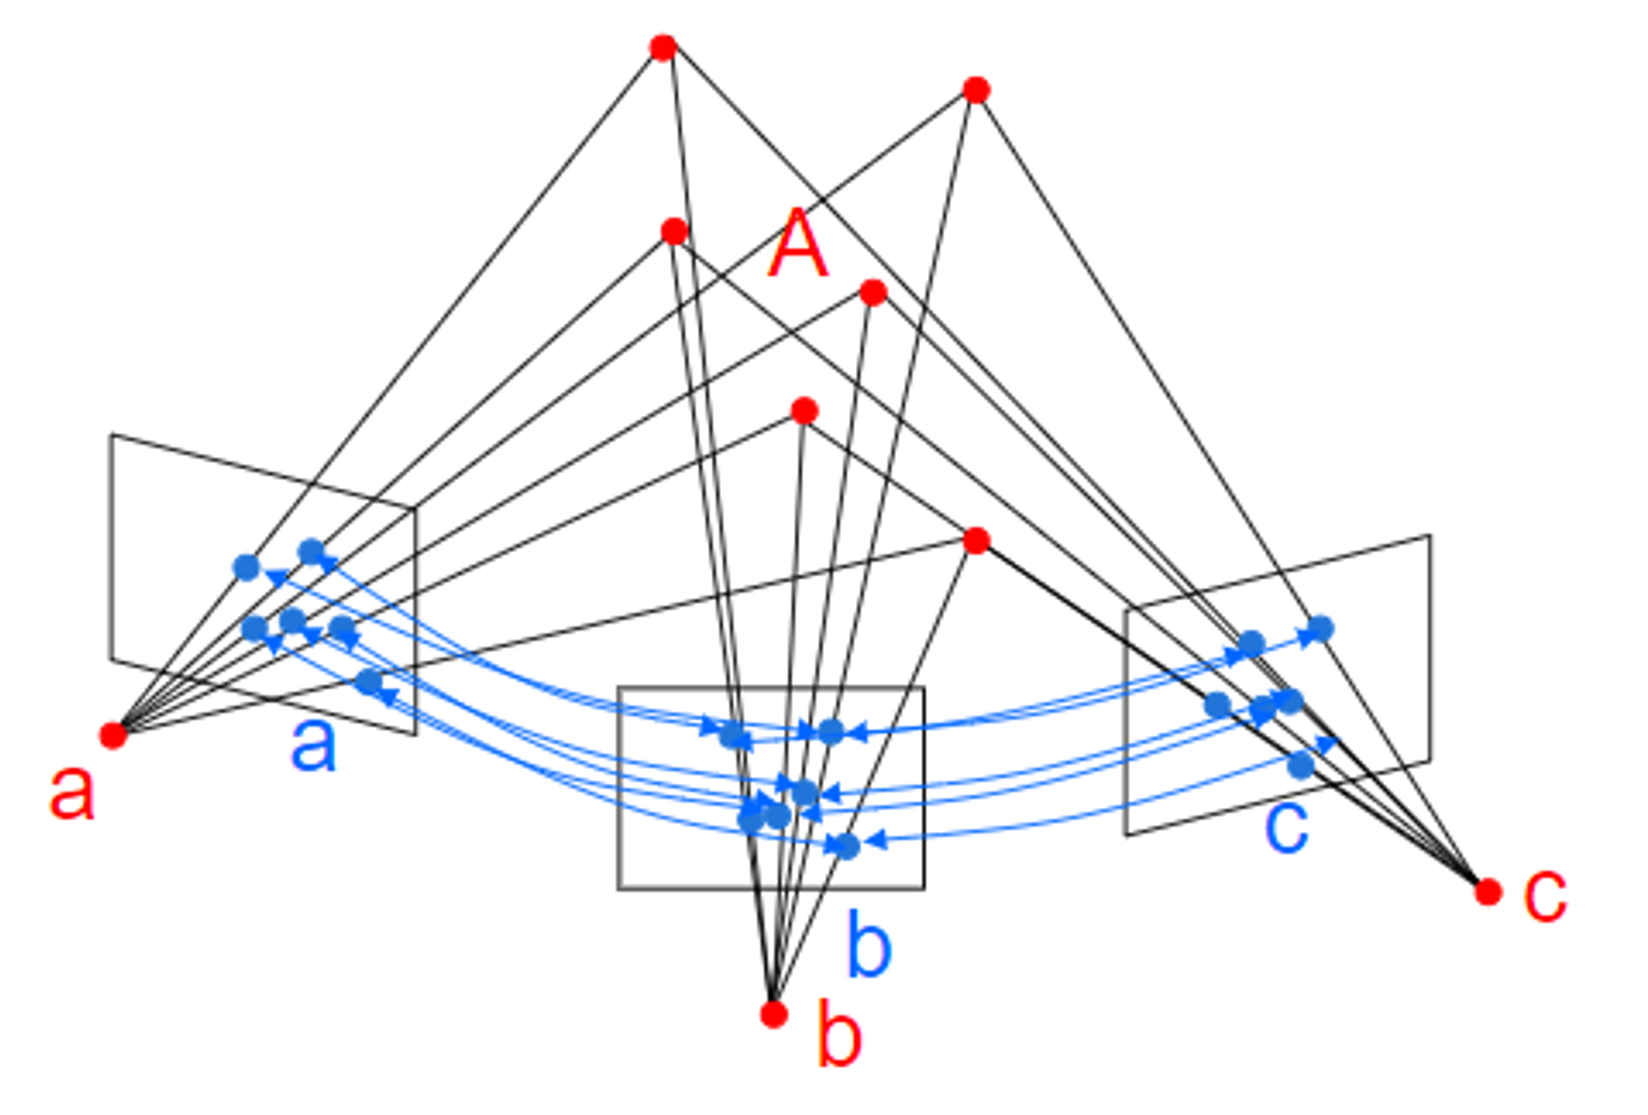 2. Projective Geometry and Transformations of 2D